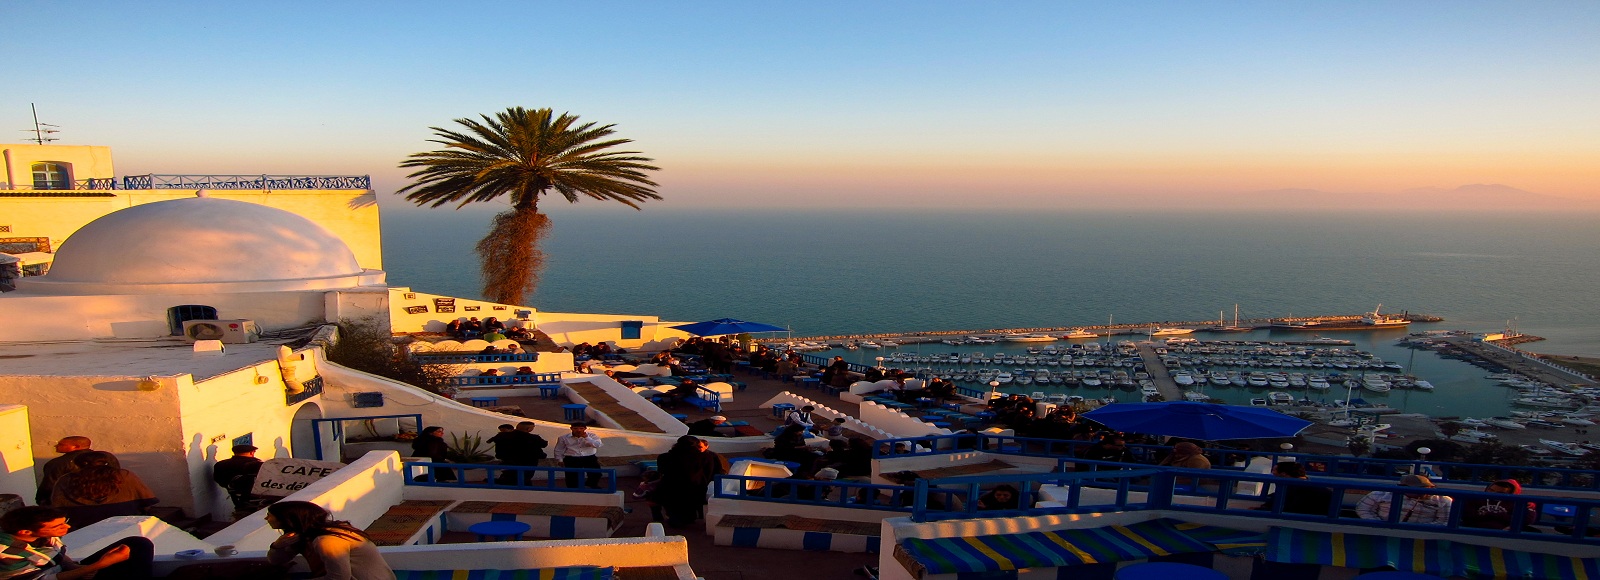 Transfer Offers in Tunis. Low Cost Transfers in  Tunis 